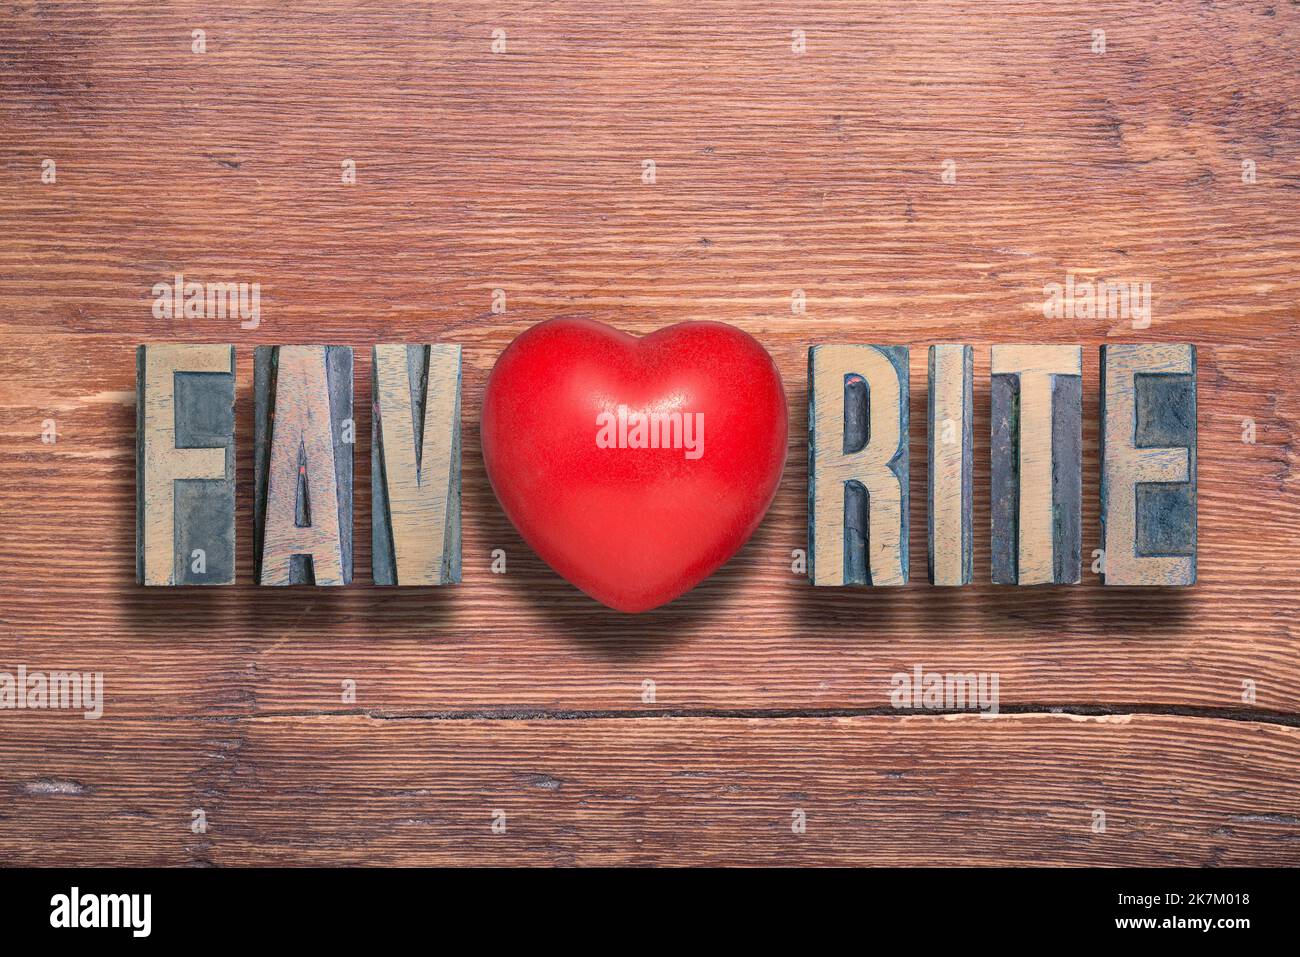 favorite word combined on vintage varnished wooden surface with heart symbol inside Stock Photo